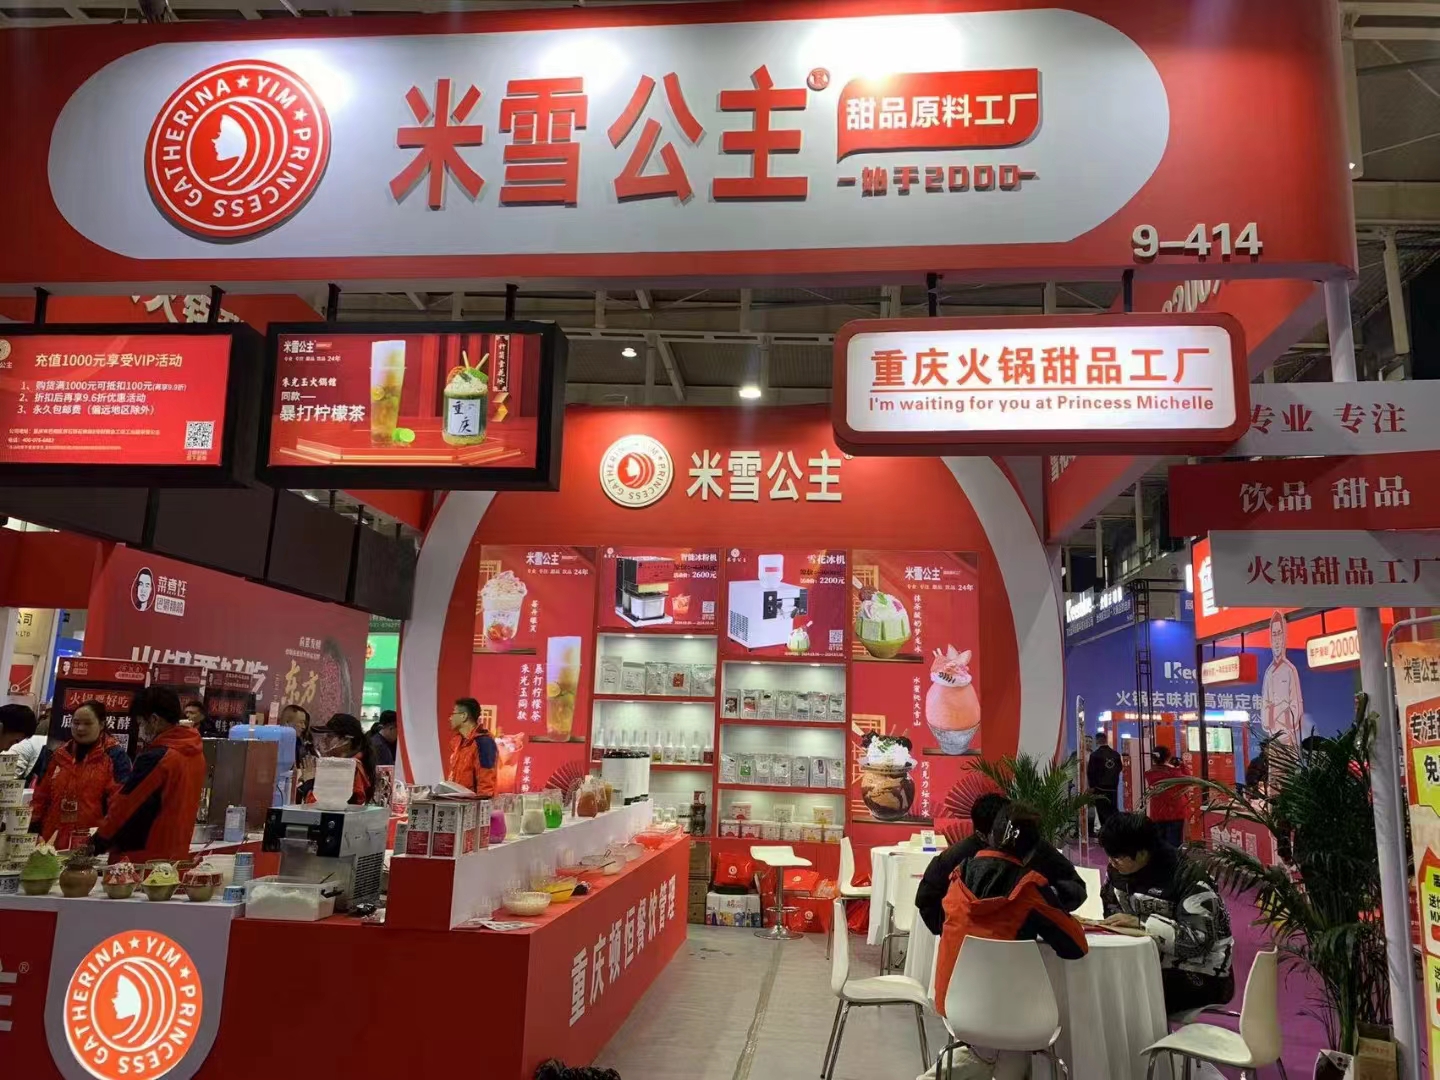 Chongqing Dunheng participates in the 6th Nanjing Catering Industry Expo